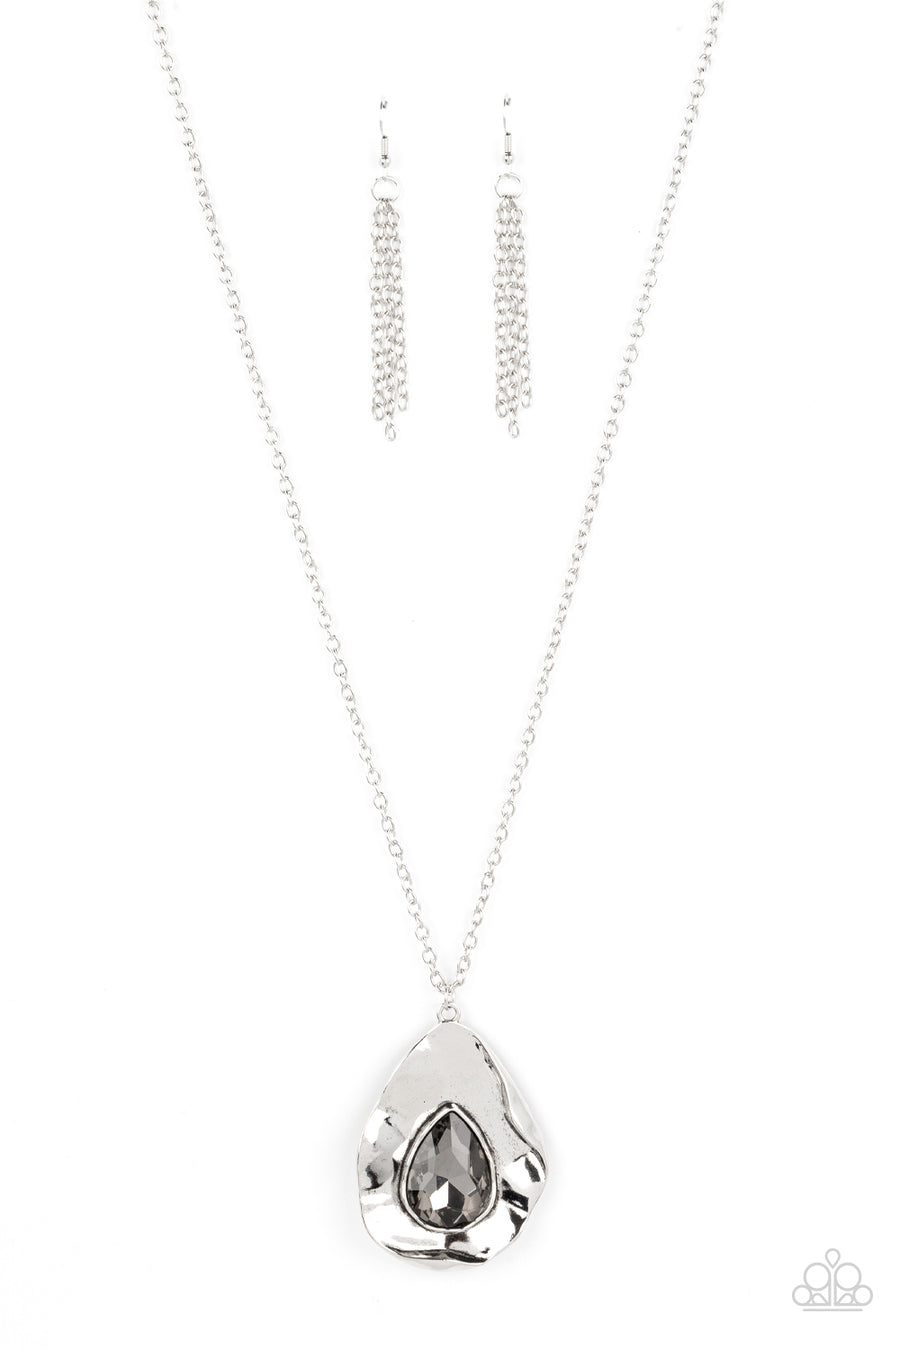 Surrealist Sparkle - Silver Necklace - Paparazzi Accessories - A warped silver frame gently folds around an oversized smoky teardrop gem center, resulting in a gritty yet glamorous pendant at the bottom of a lengthened silver chain. Features an adjustable clasp closure. Sold as one individual necklace.